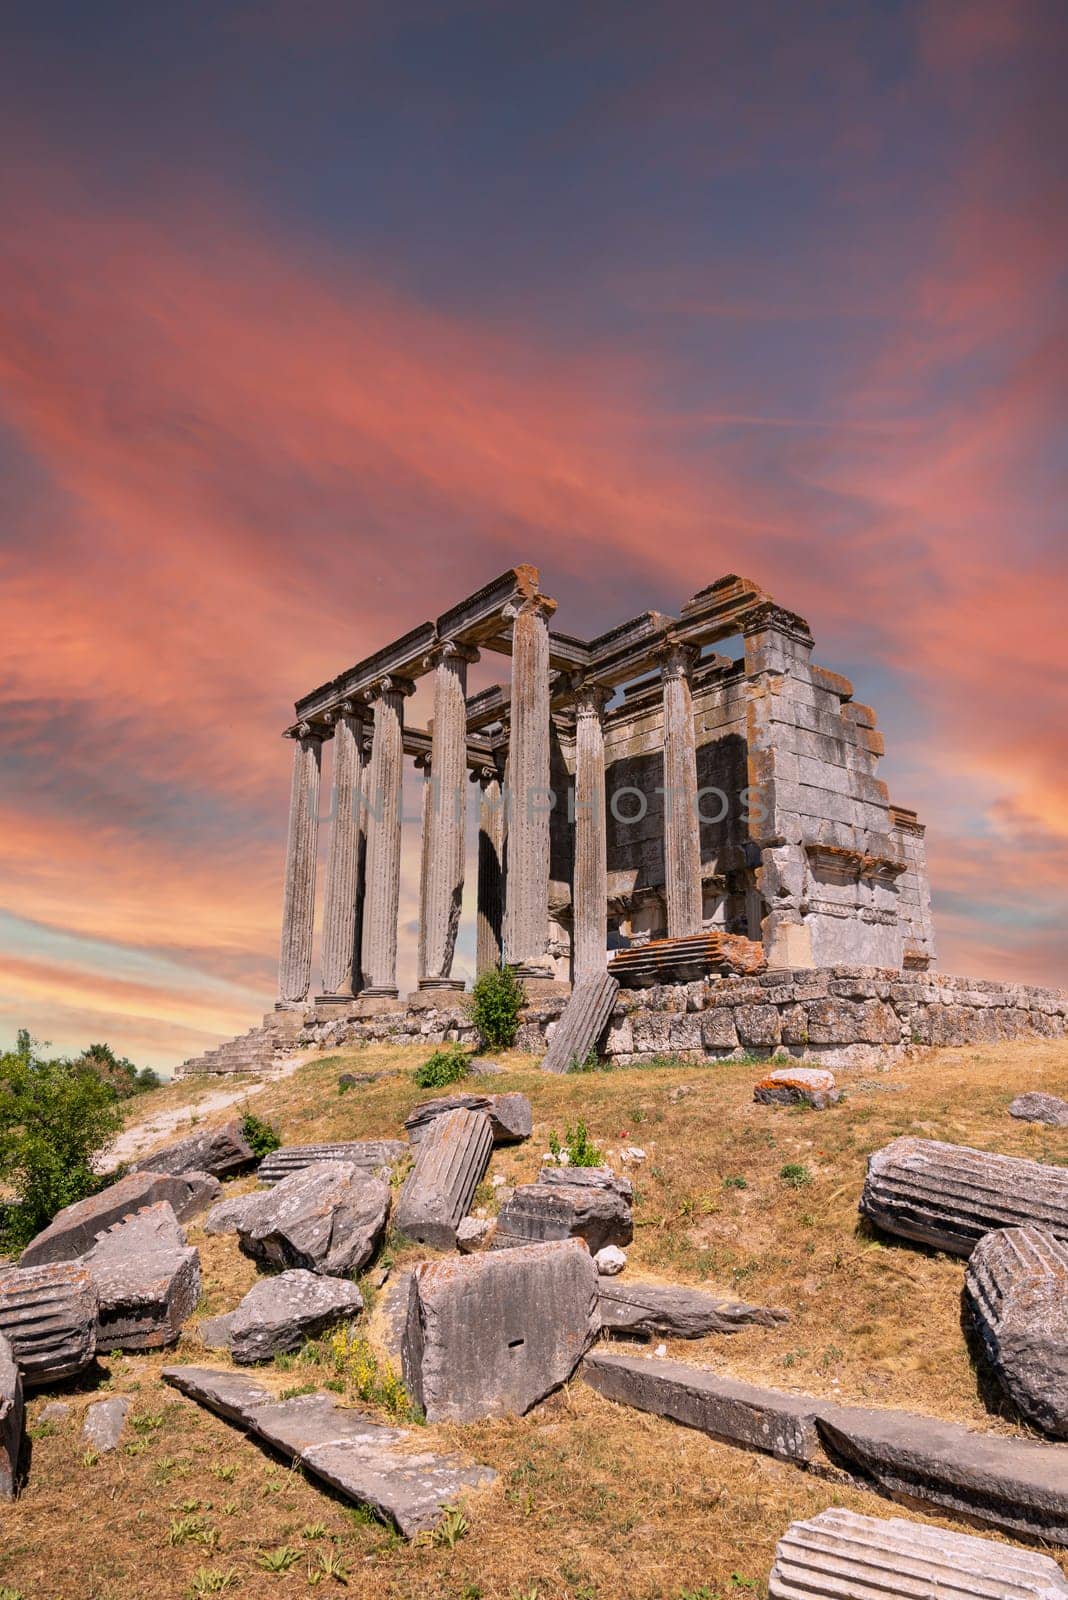 Zeus temple in the ancient city of Aizanoi in Kütahya Turkey by Sonat